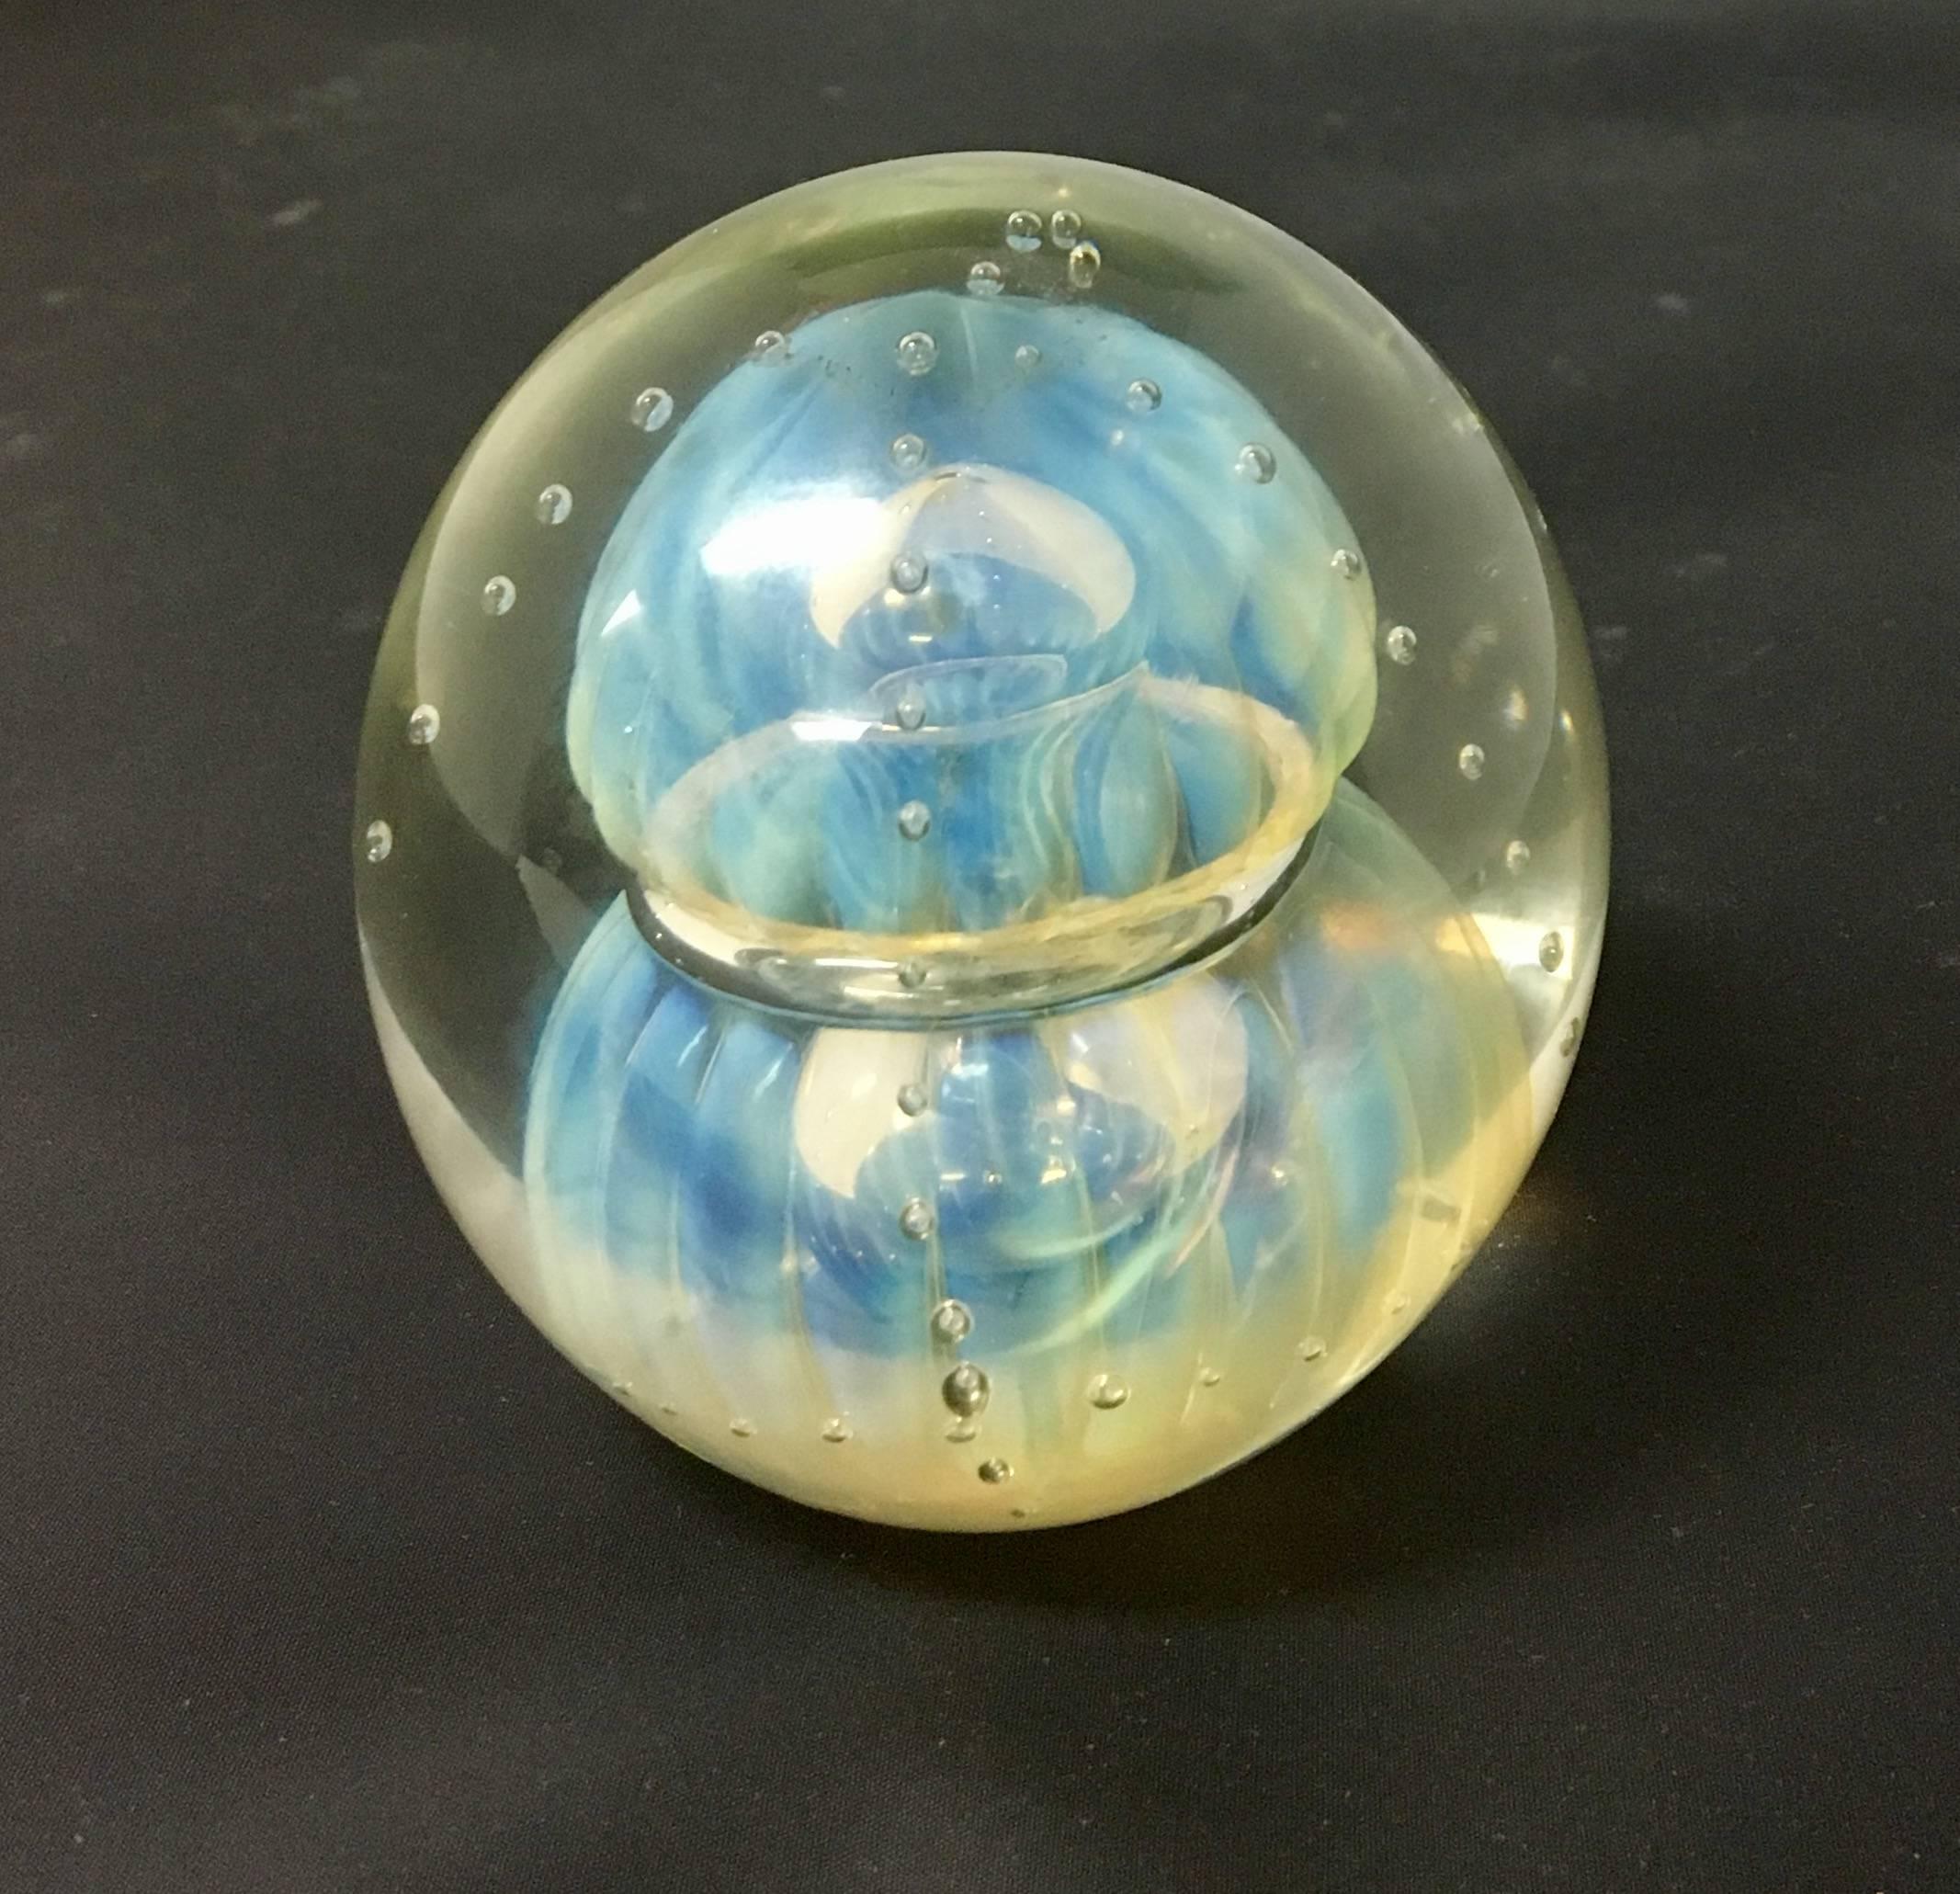 Beautiful and unique blown glass paper weight signed and dated "1987" by Edols. Clear glass with a white jellyfish like shape and bubbles that gives the illusion of being lit. Very high quality.